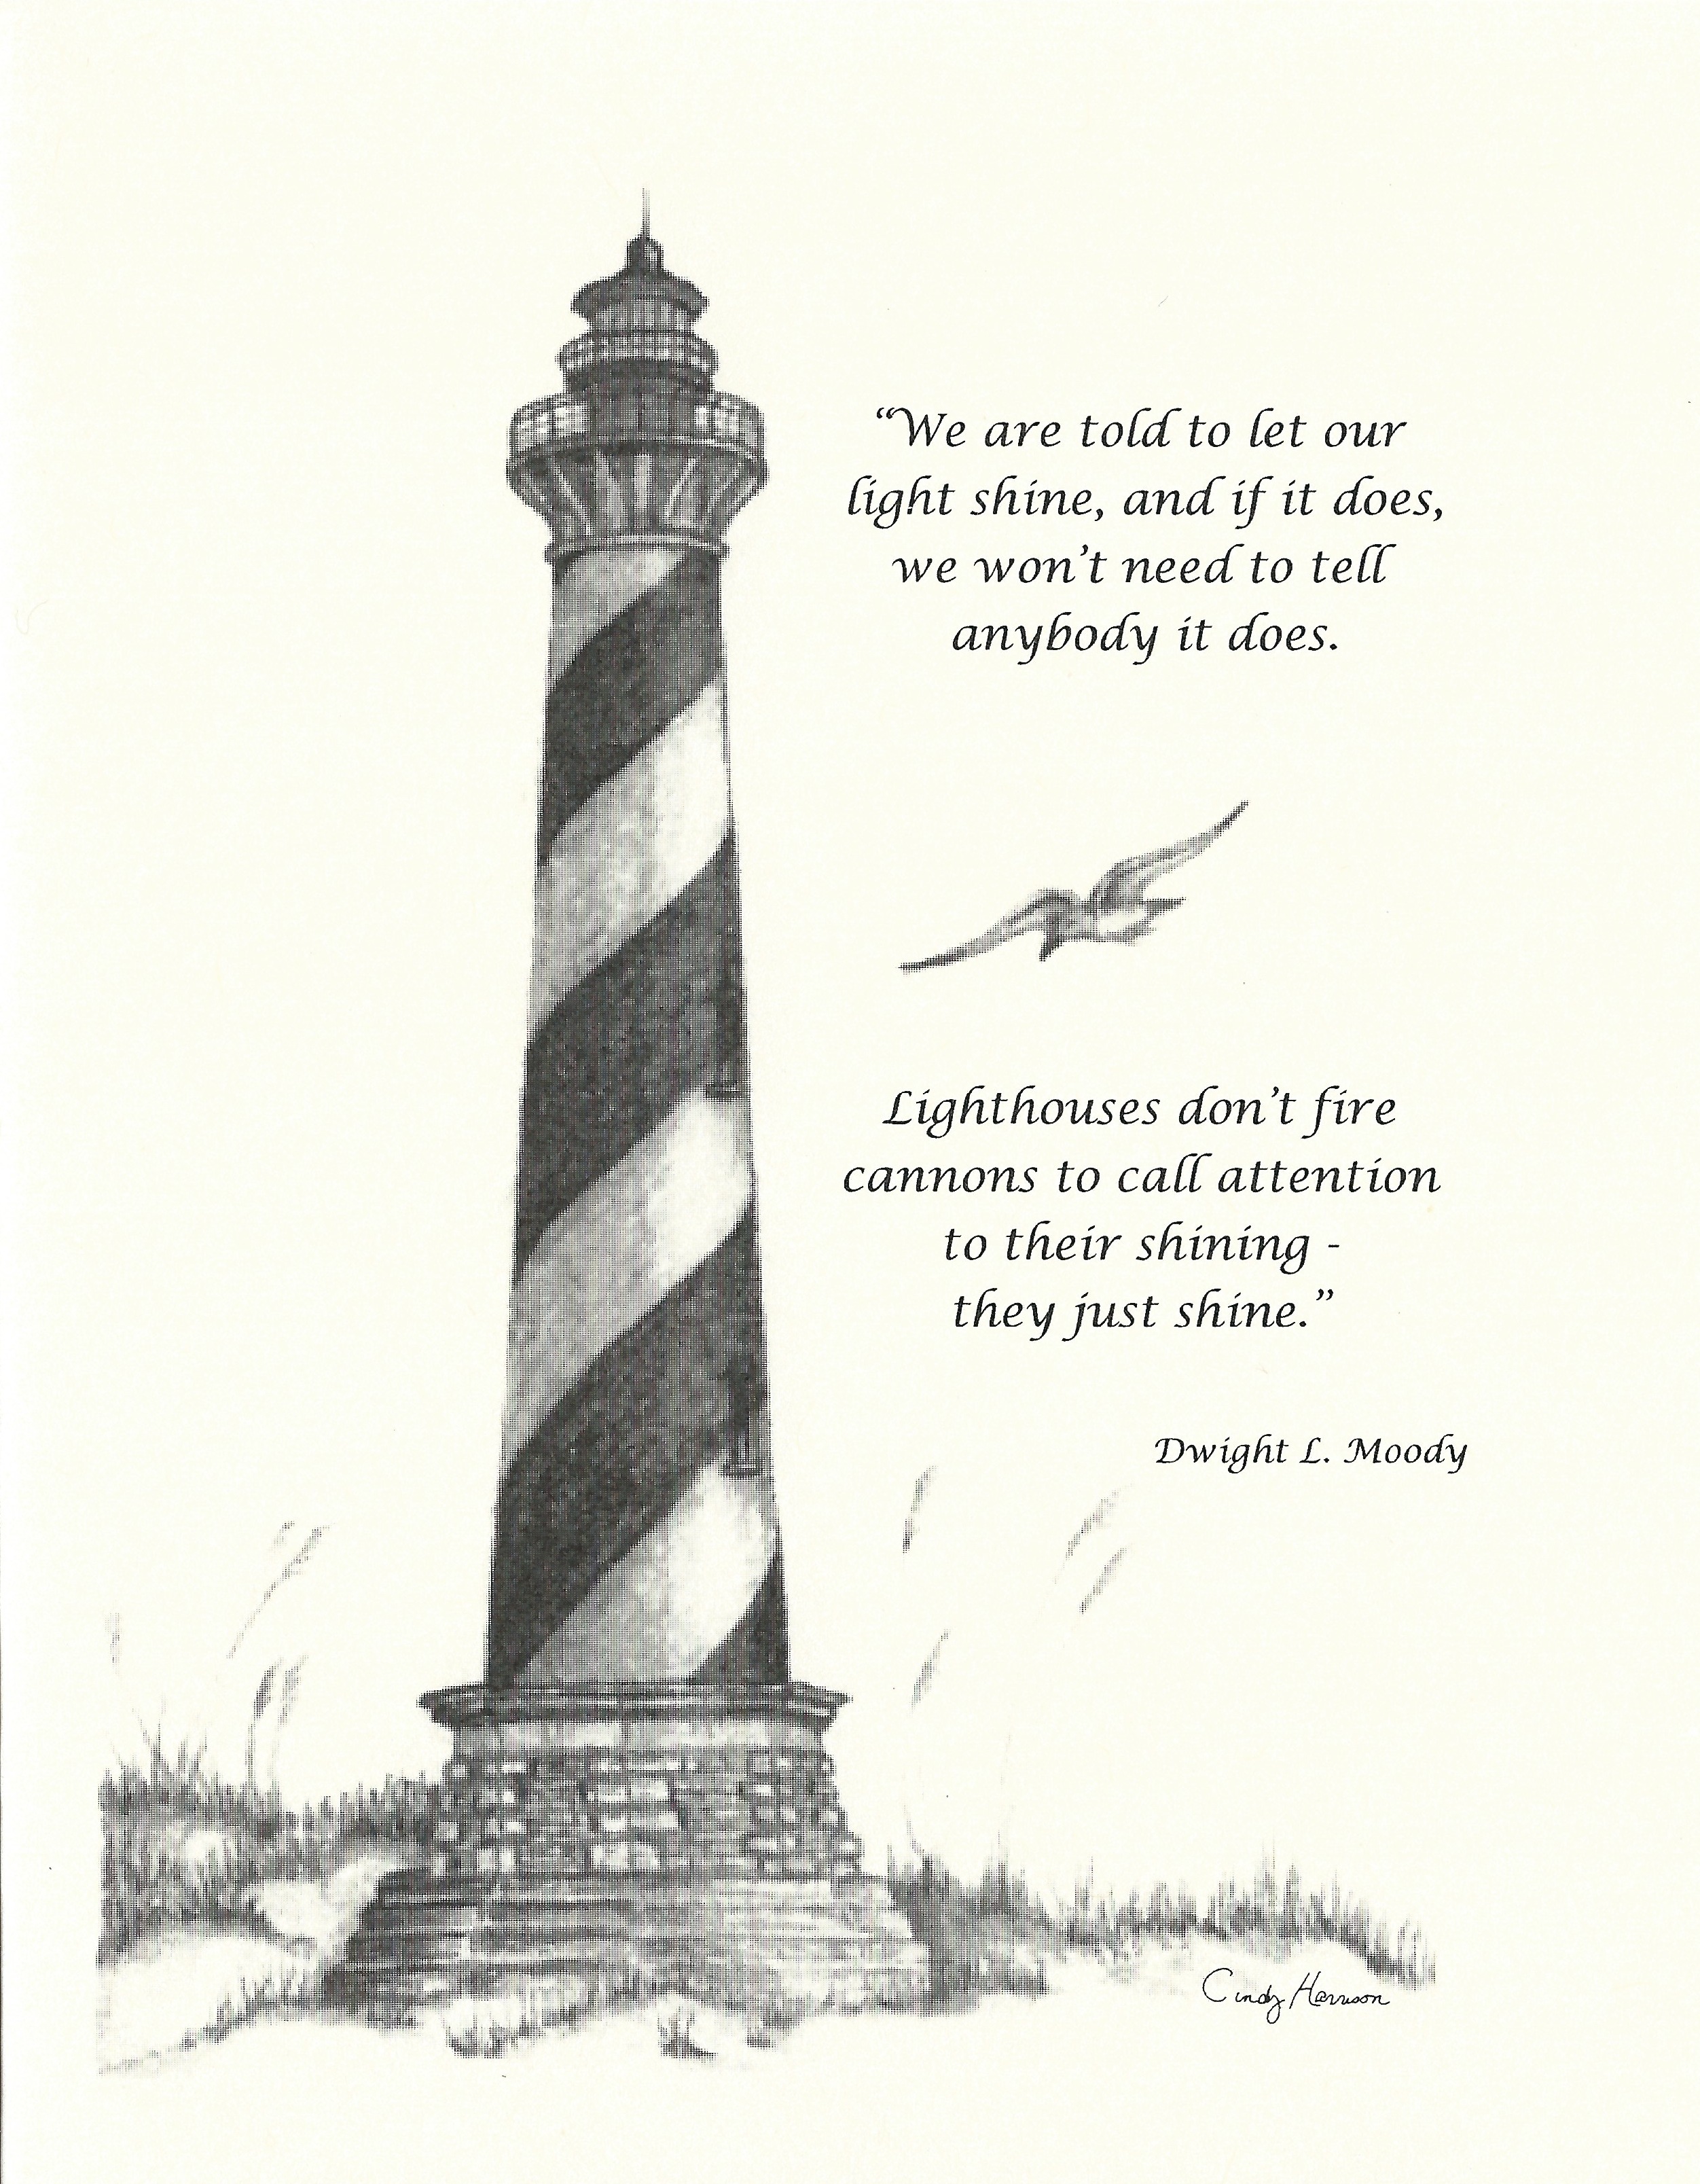 Free Lighthouse Drawing, Download Free Lighthouse Drawing png images